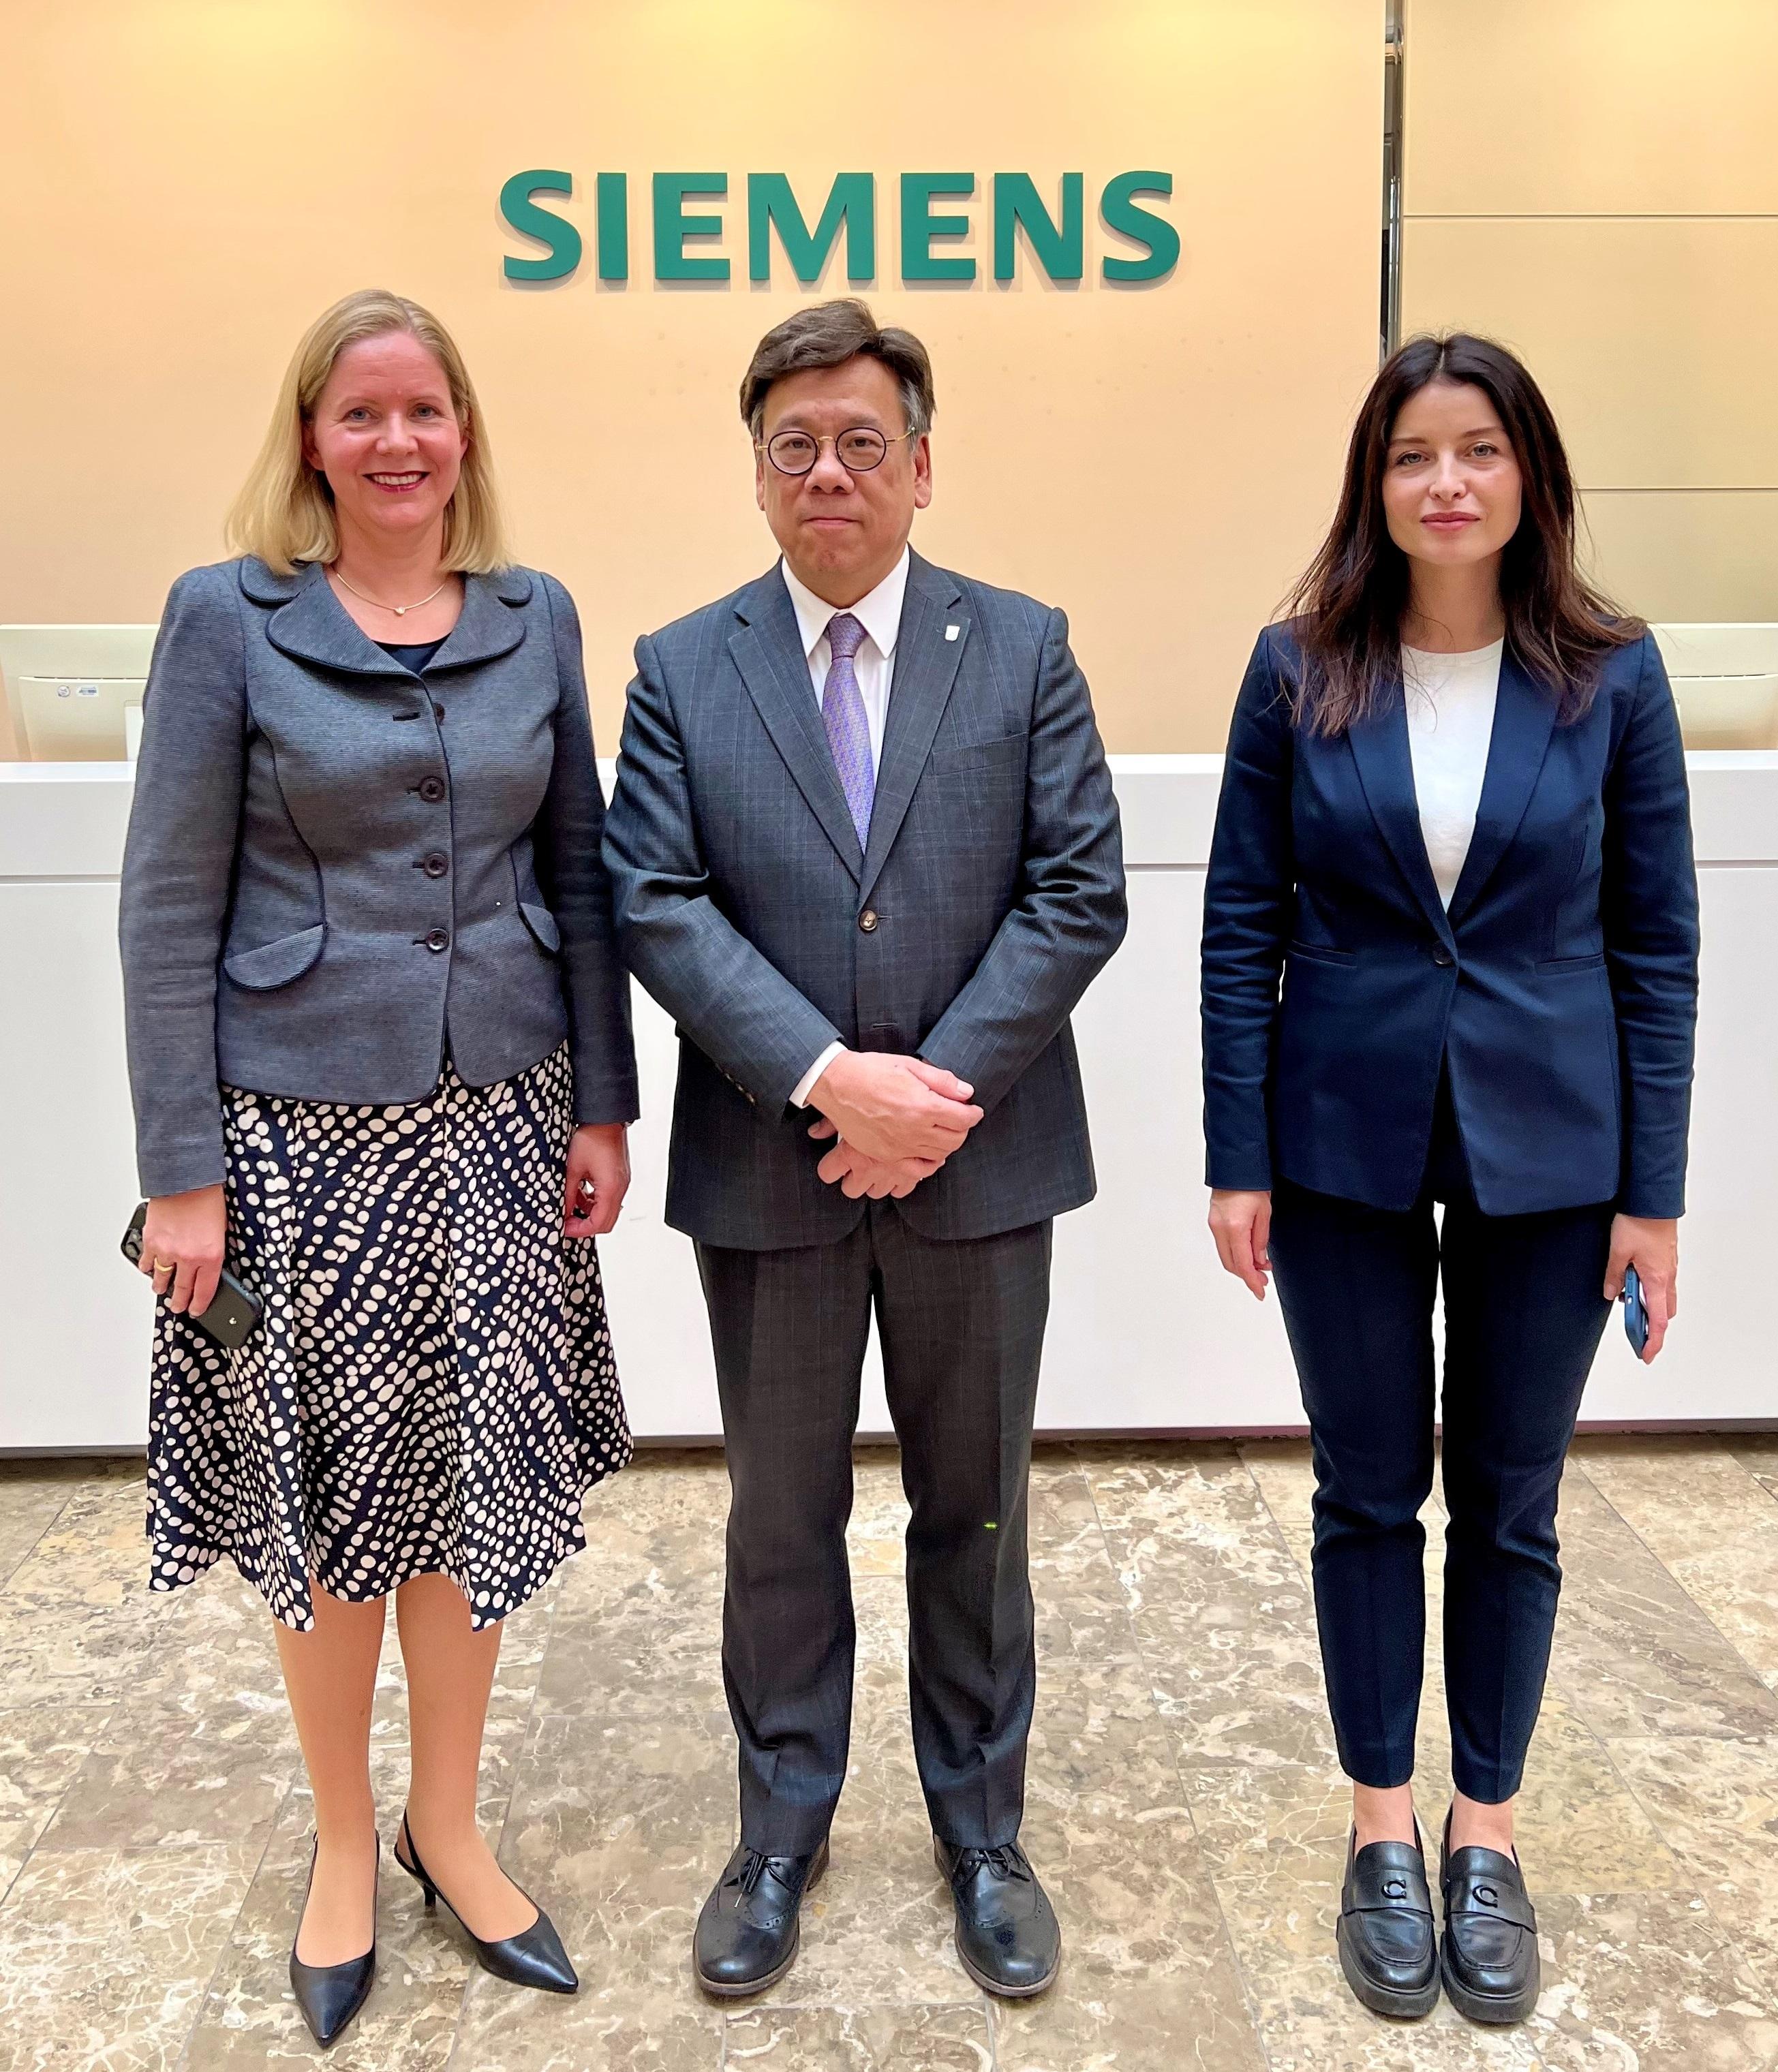 The Secretary for Commerce and Economic Development, Mr Algernon Yau (centre), met with the Chief Executive Officer of Siemens Financial Services, Munich, Germany, Ms Veronika Bienert (left), in Munich, Germany, on September 6 (Munich time) to update her on Hong Kong's initiatives on attracting enterprises and investments.